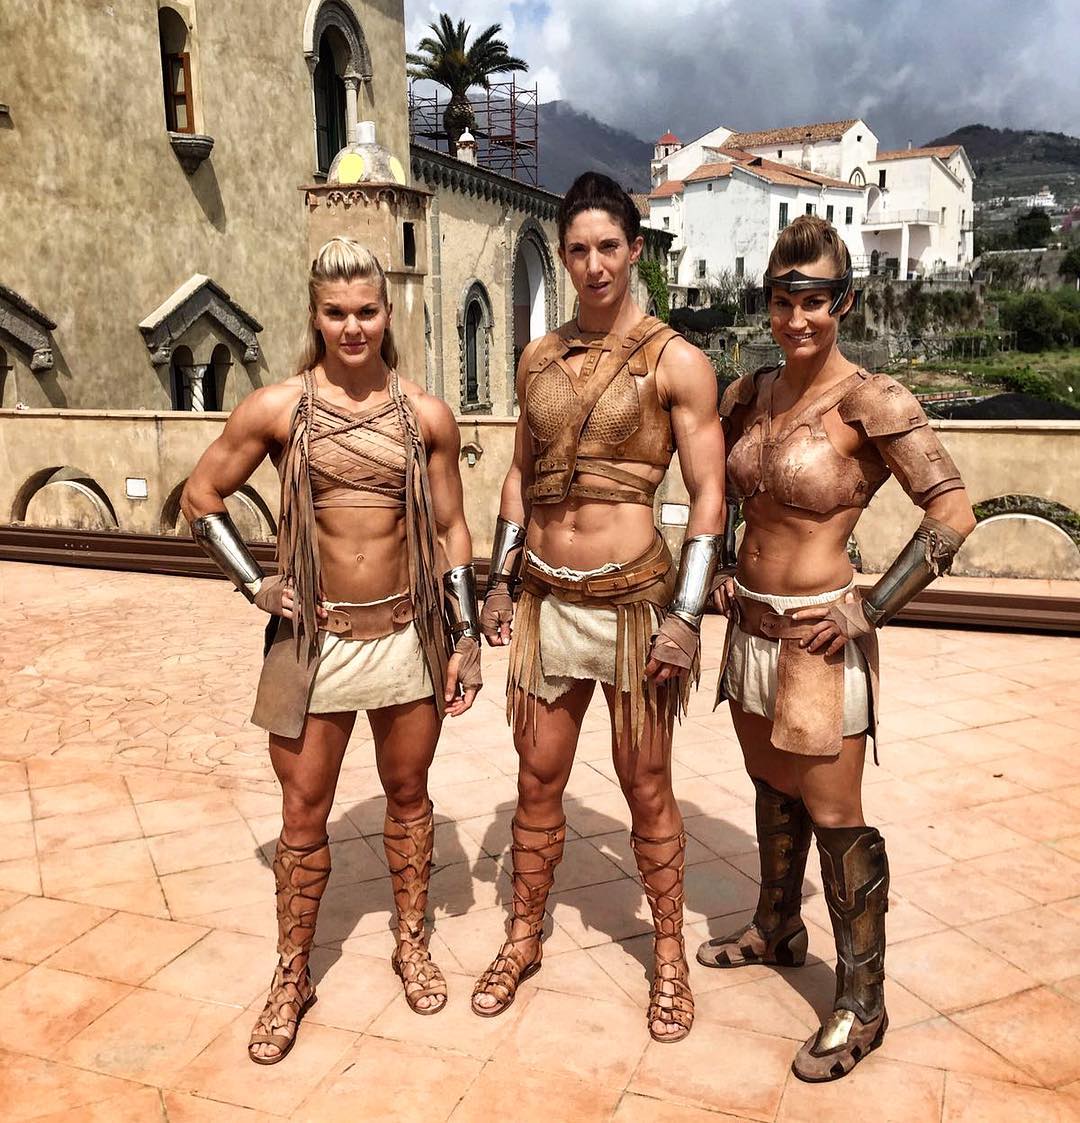 The extras from Wonder Woman are jacked!